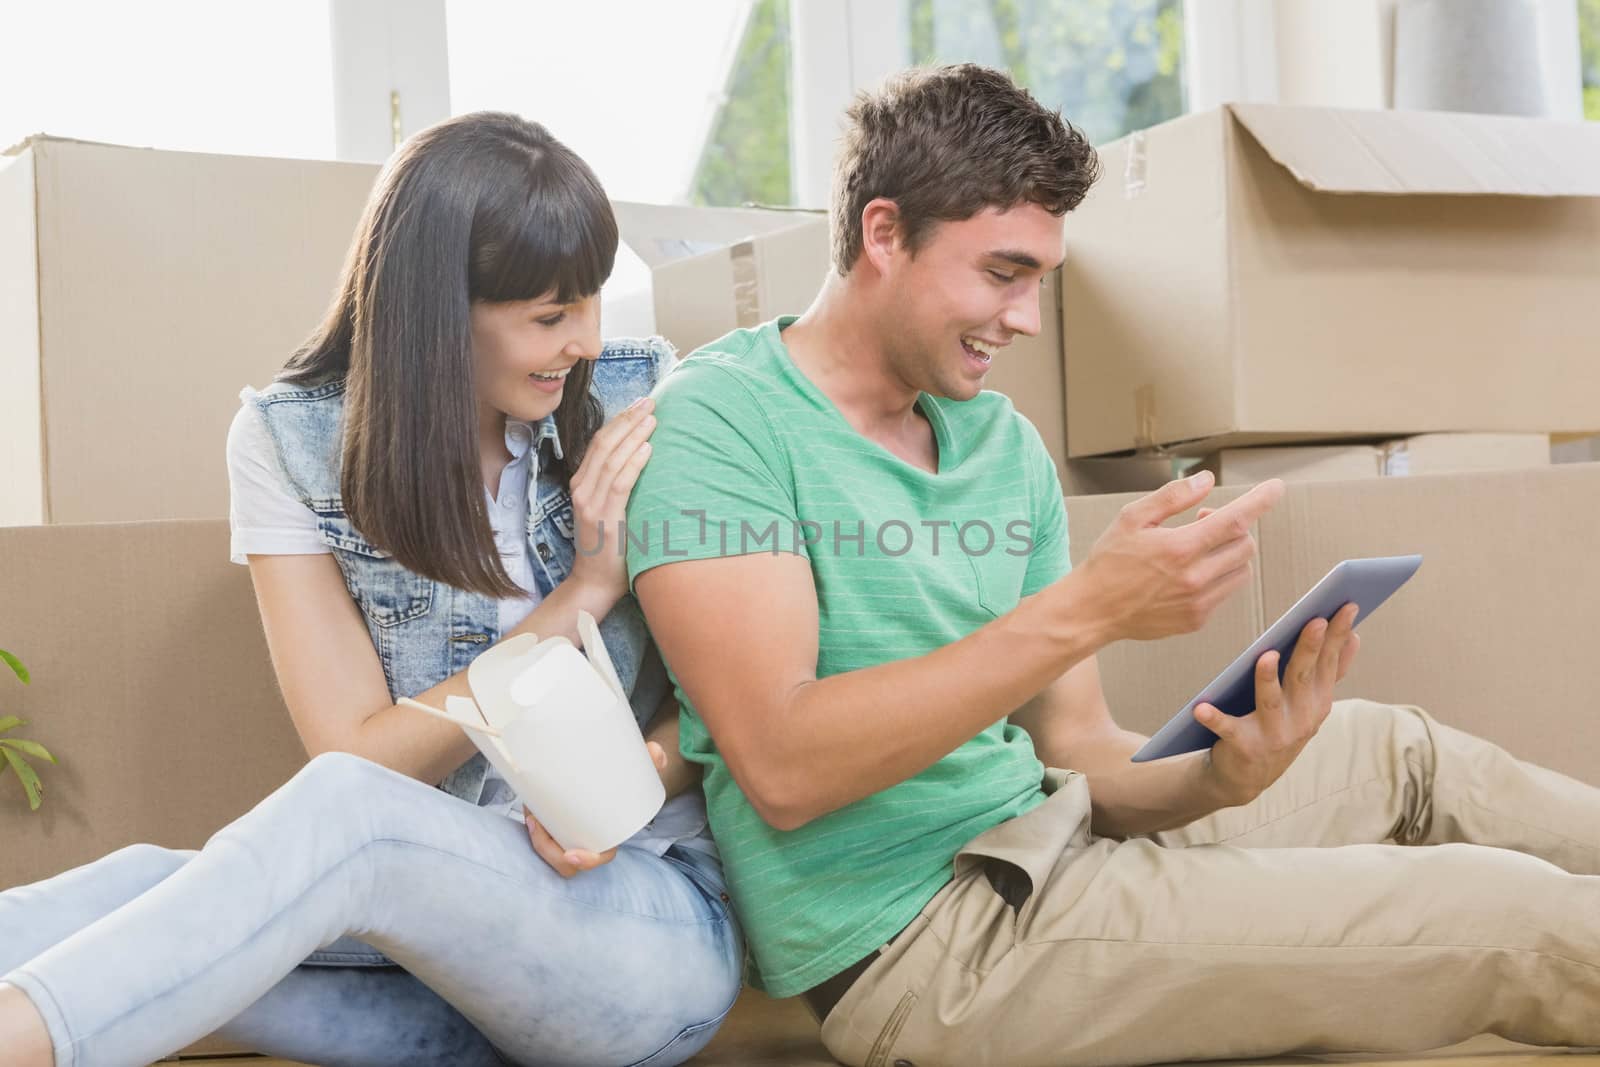 Young couple eating noodle and using digital tablet in their new house